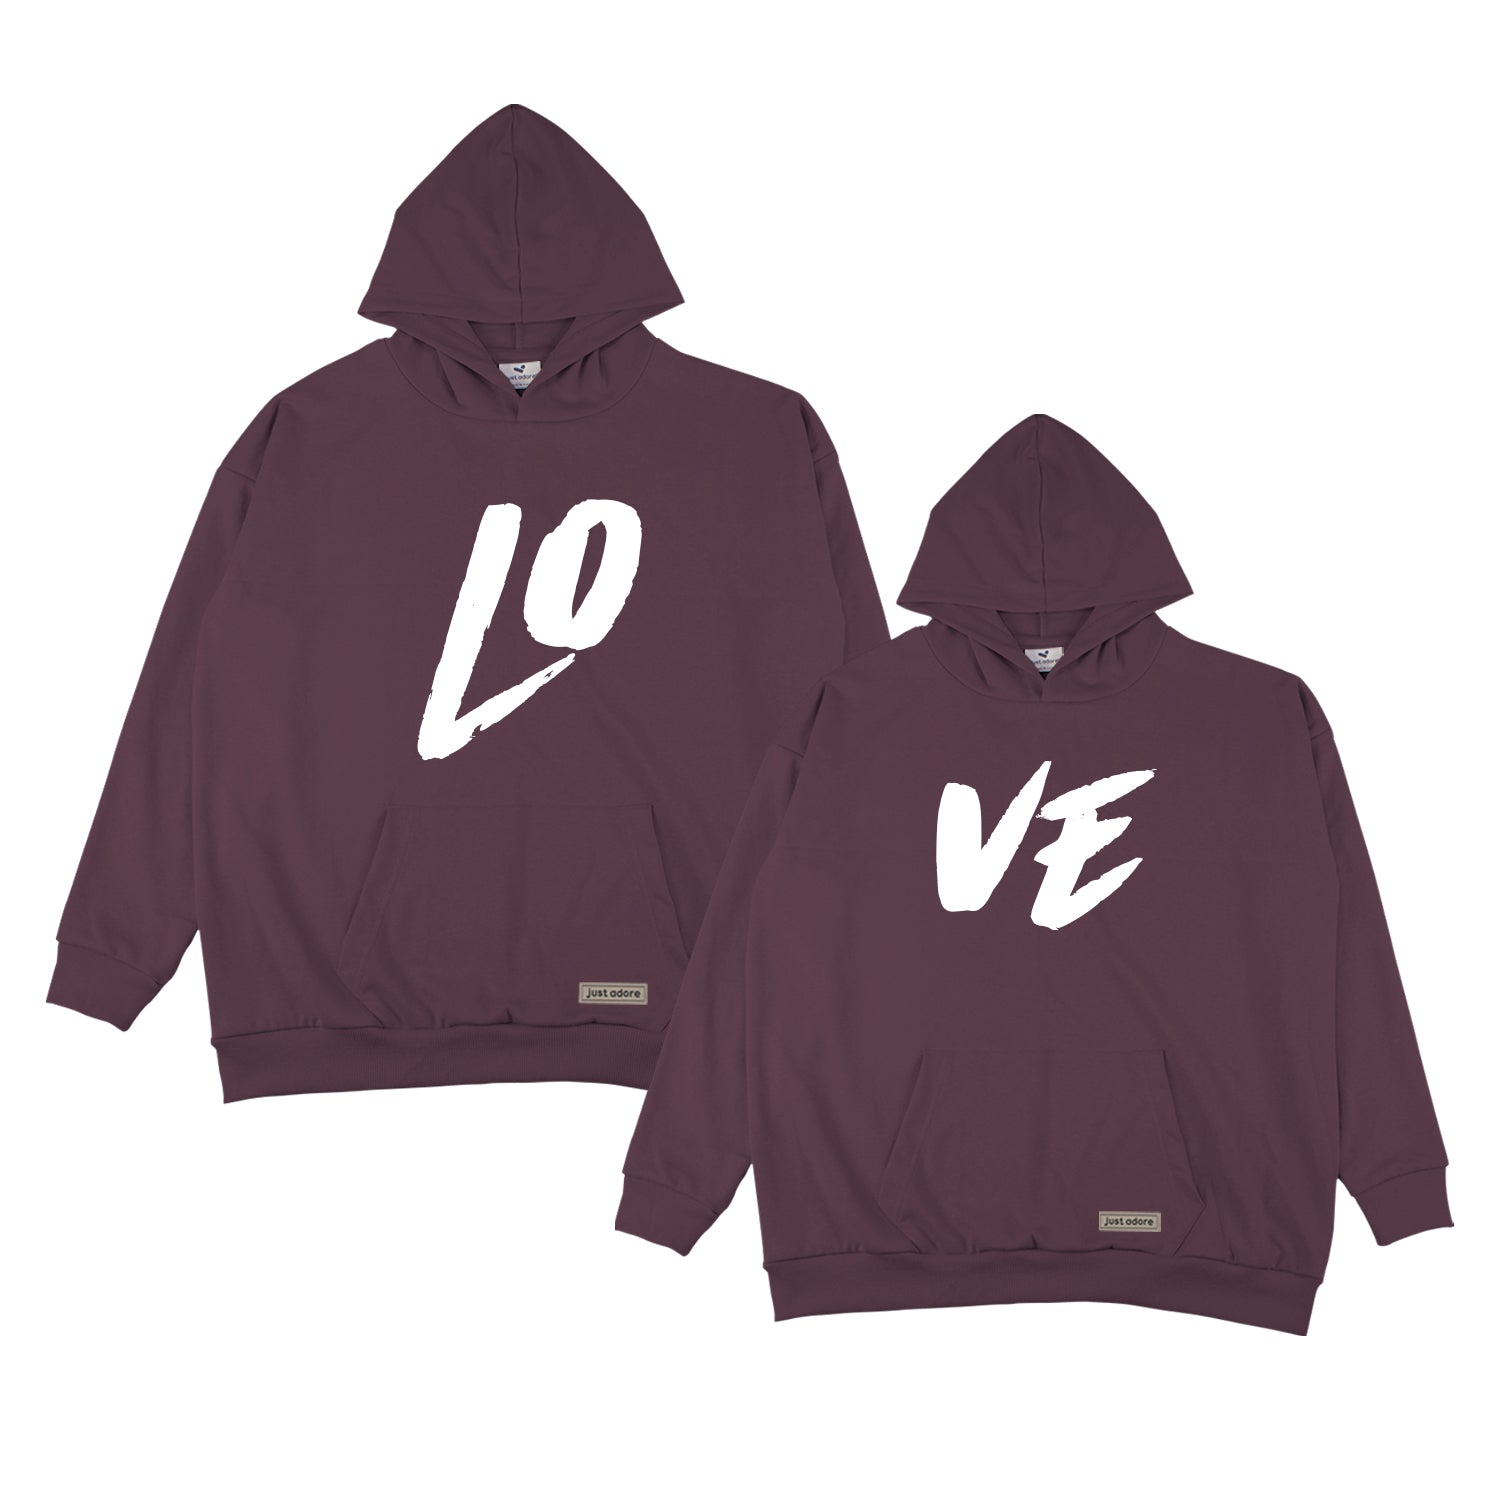 Best Matching Hoodies for Couples - Cute couple hoodies online